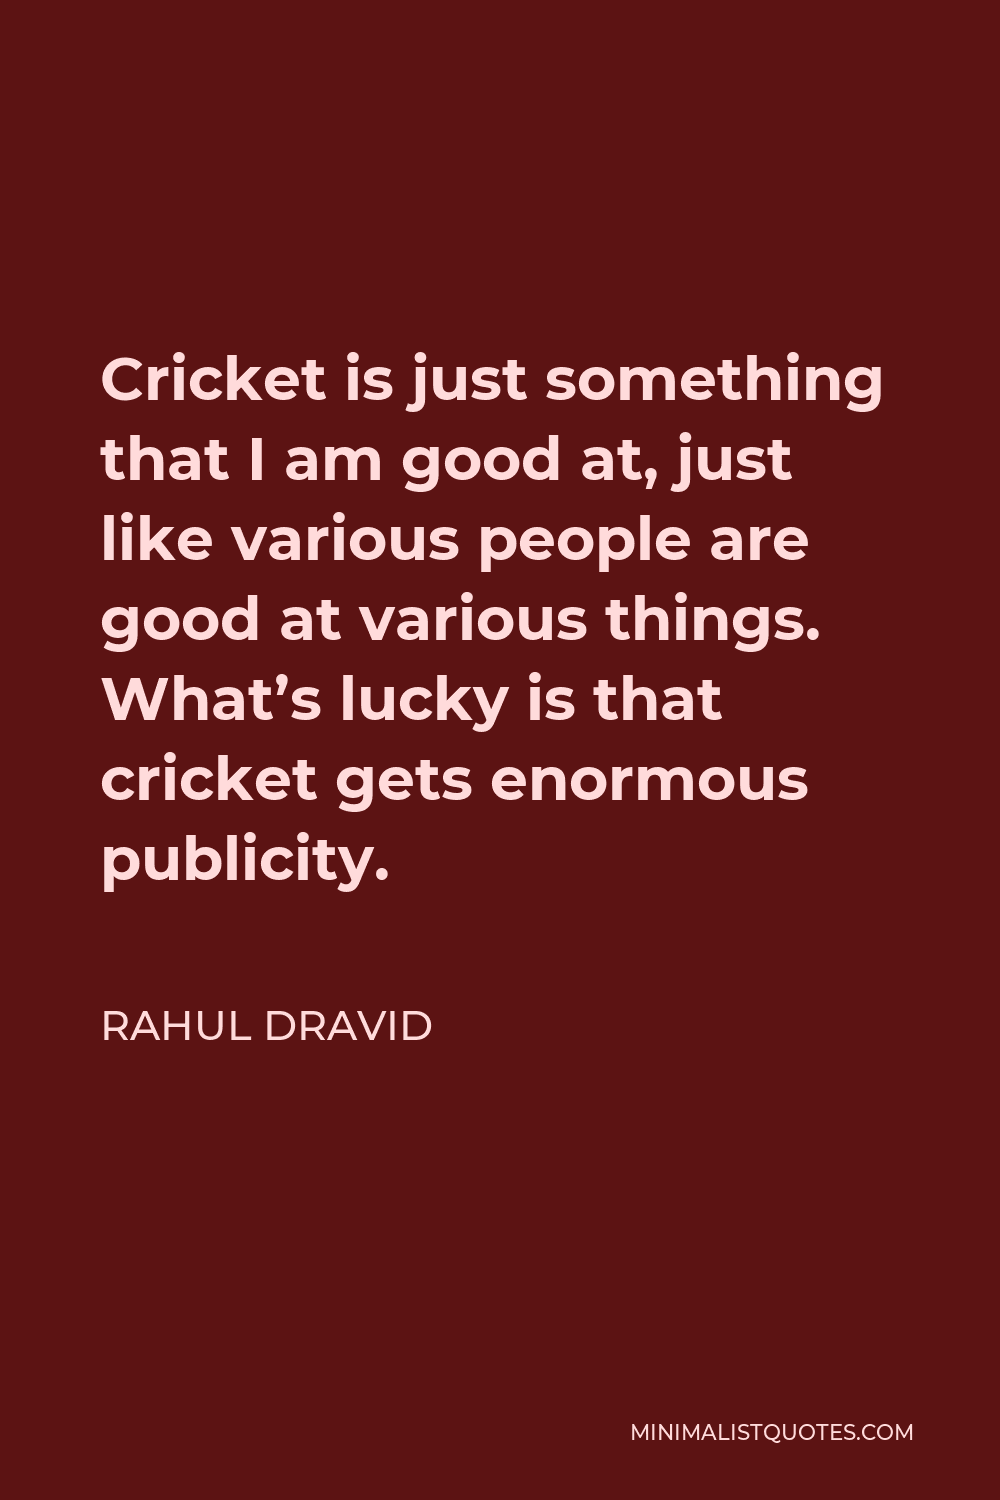 Rahul Dravid Quote - Cricket is just something that I am good at, just like various people are good at various things. What’s lucky is that cricket gets enormous publicity.